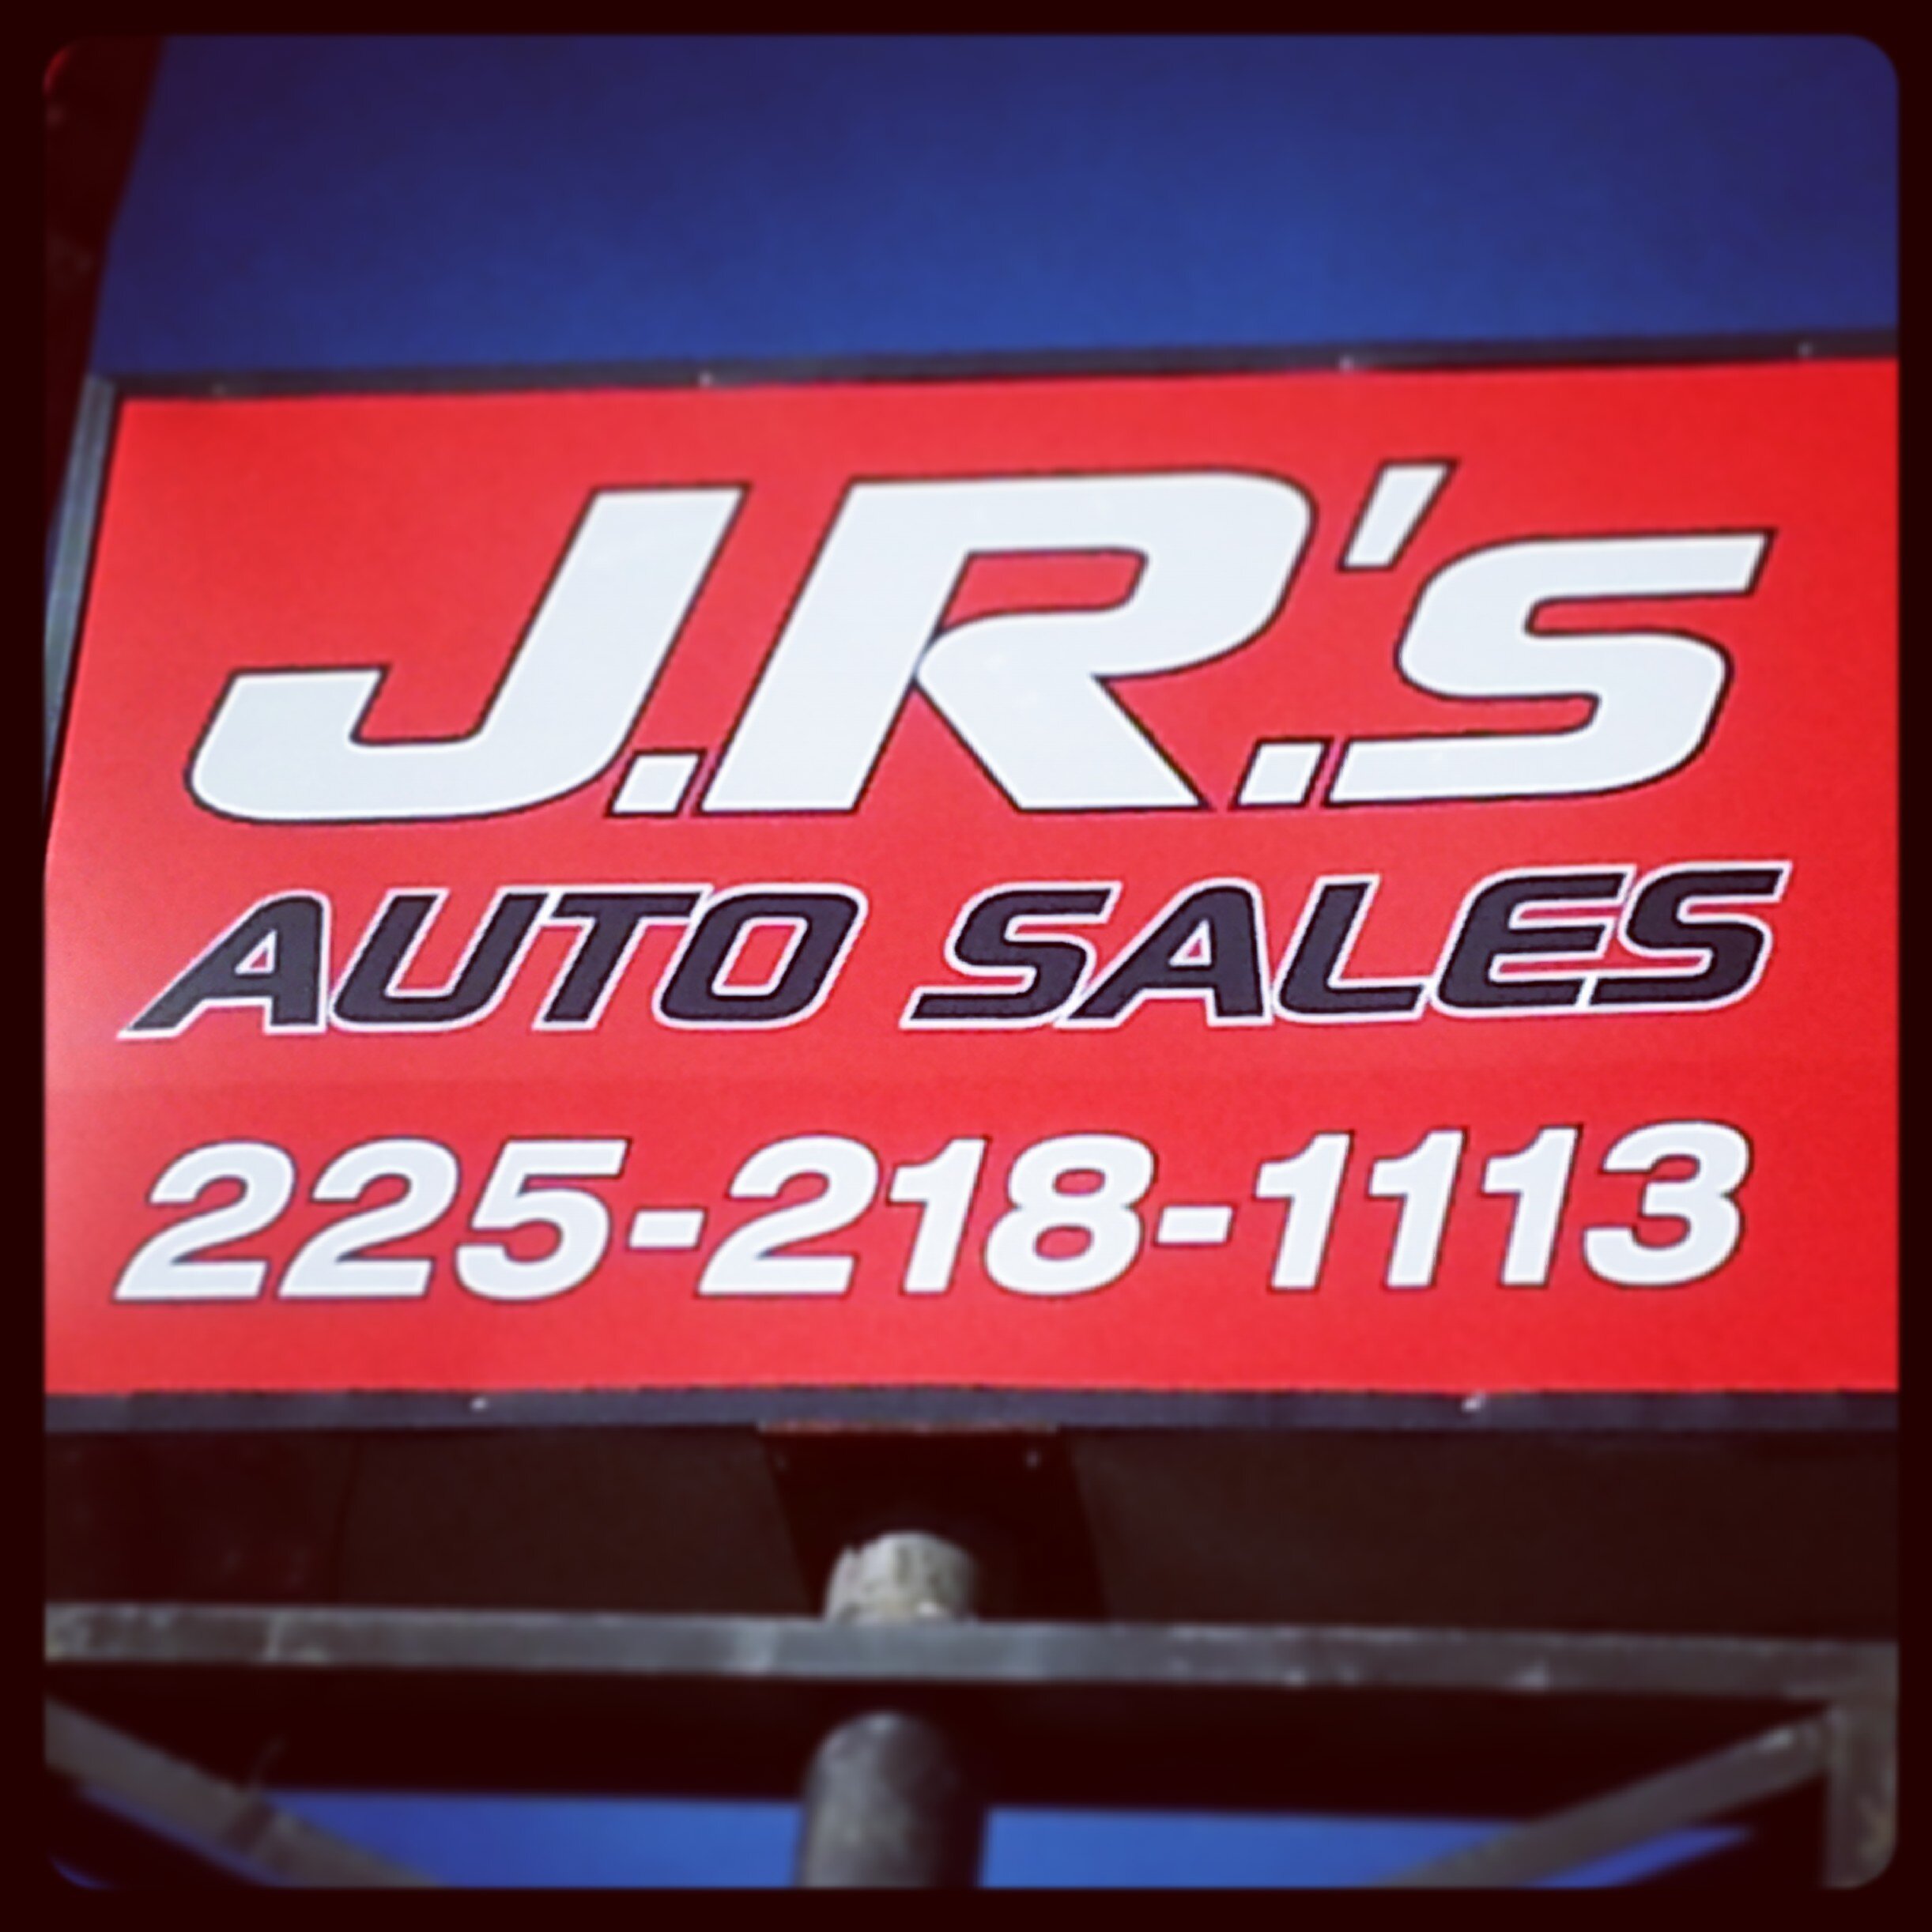 Tired of being Pre-Qualified at other car lots, J.R.'s Auto Sales is here to help you ride in the car you want!